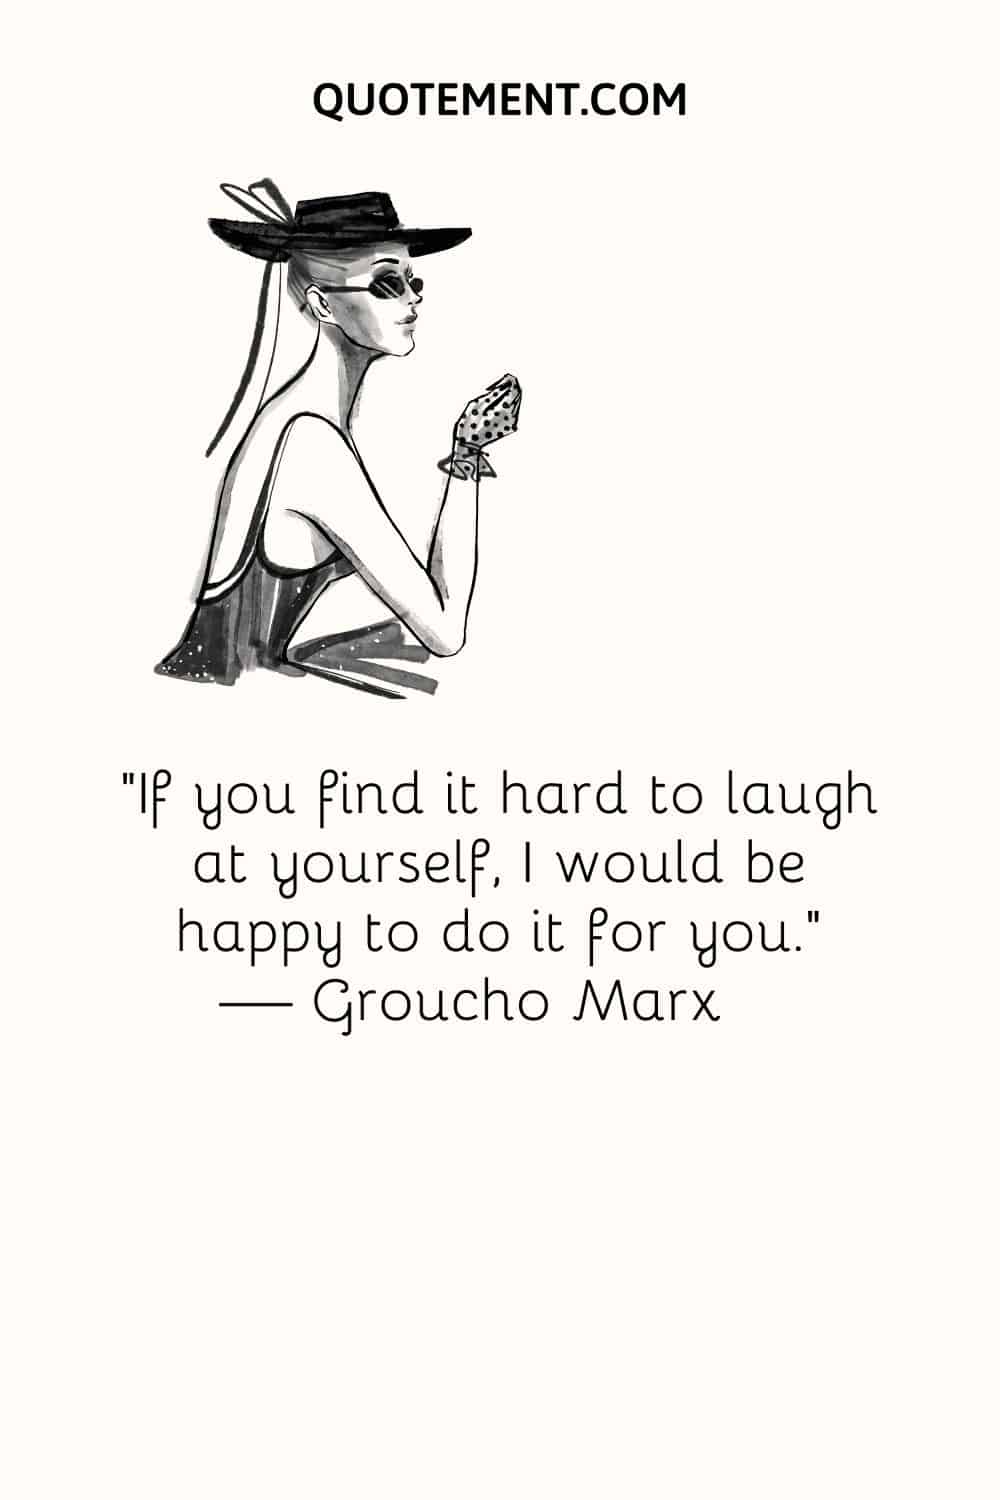 “If you find it hard to laugh at yourself, I would be happy to do it for you.” — Groucho Marx